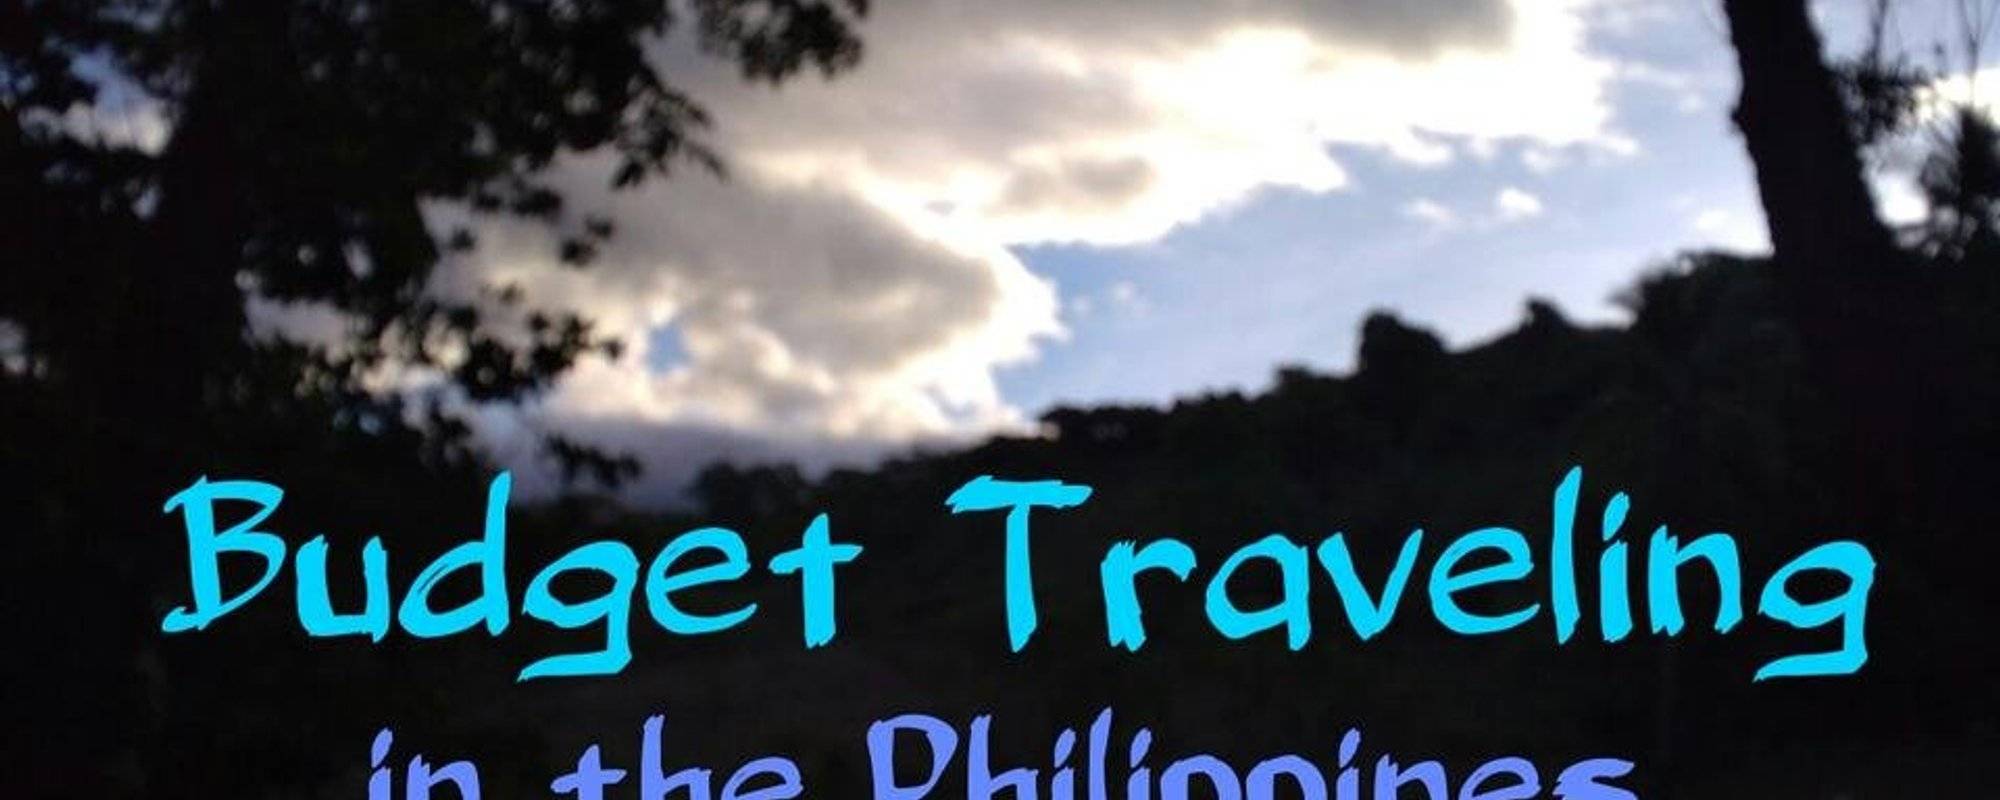 How to Travel As a Budget Traveler in The Philippines. How To: Weekly contest by @artgirl